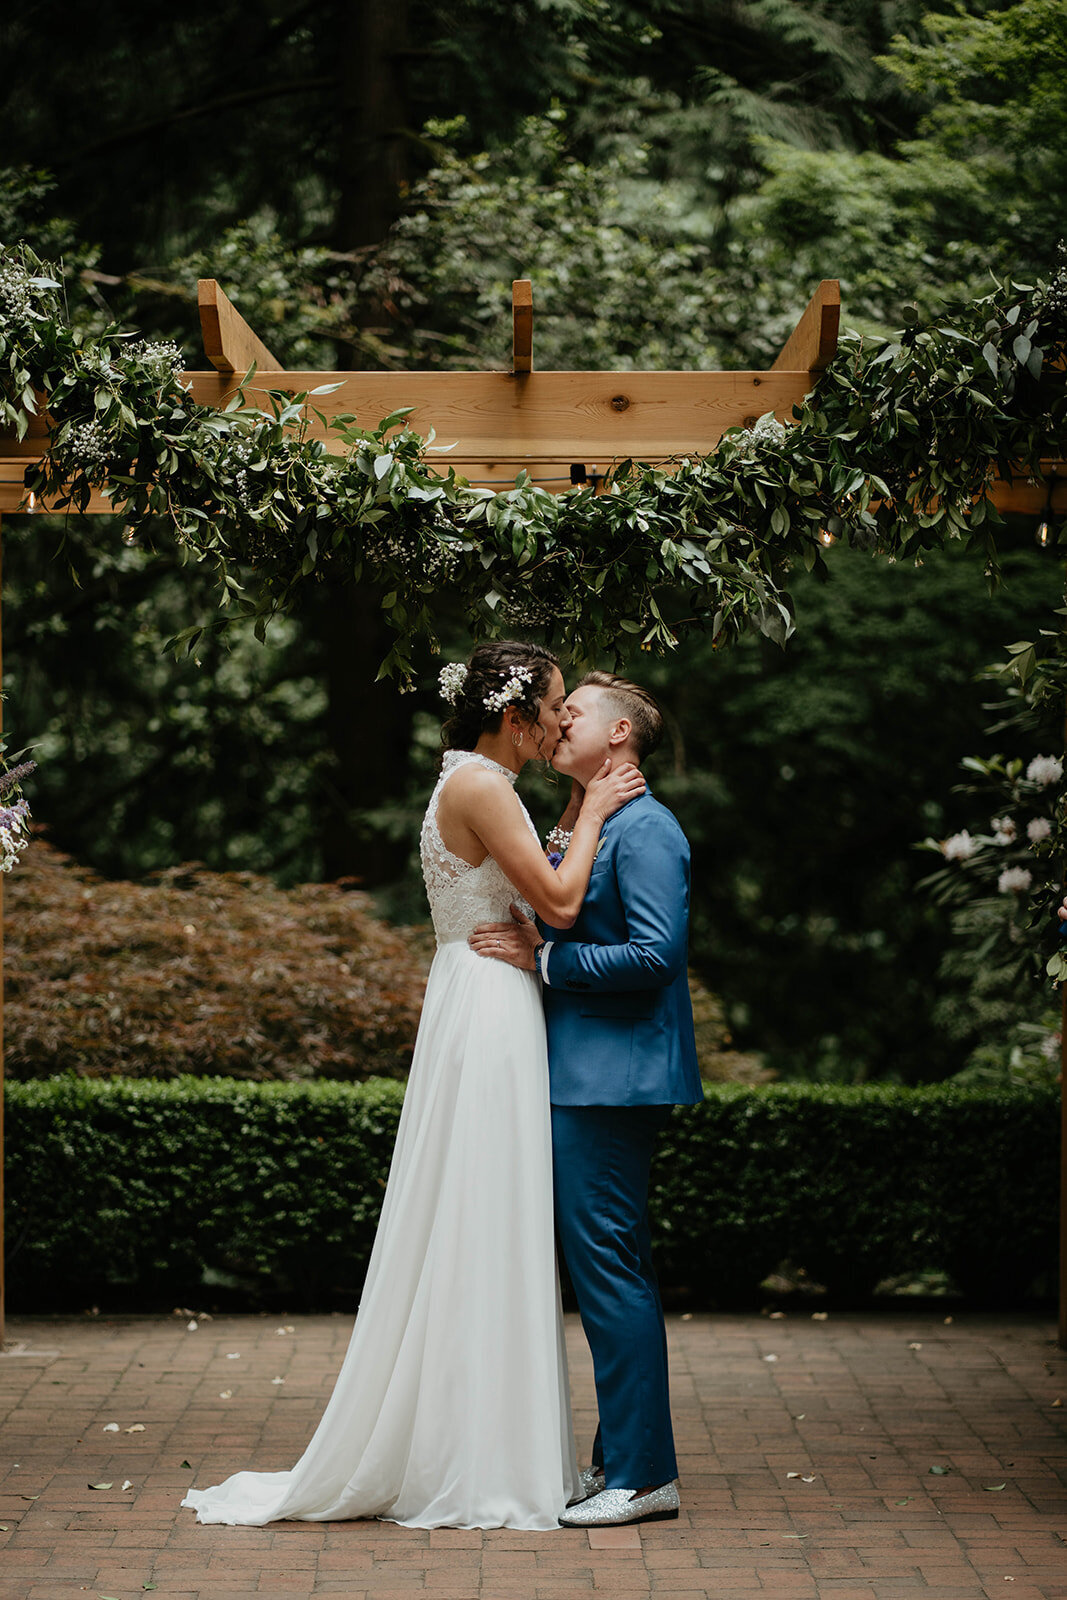 Bride and Bride sharing their first kiss after their ceremony at Leach Botanical Garden